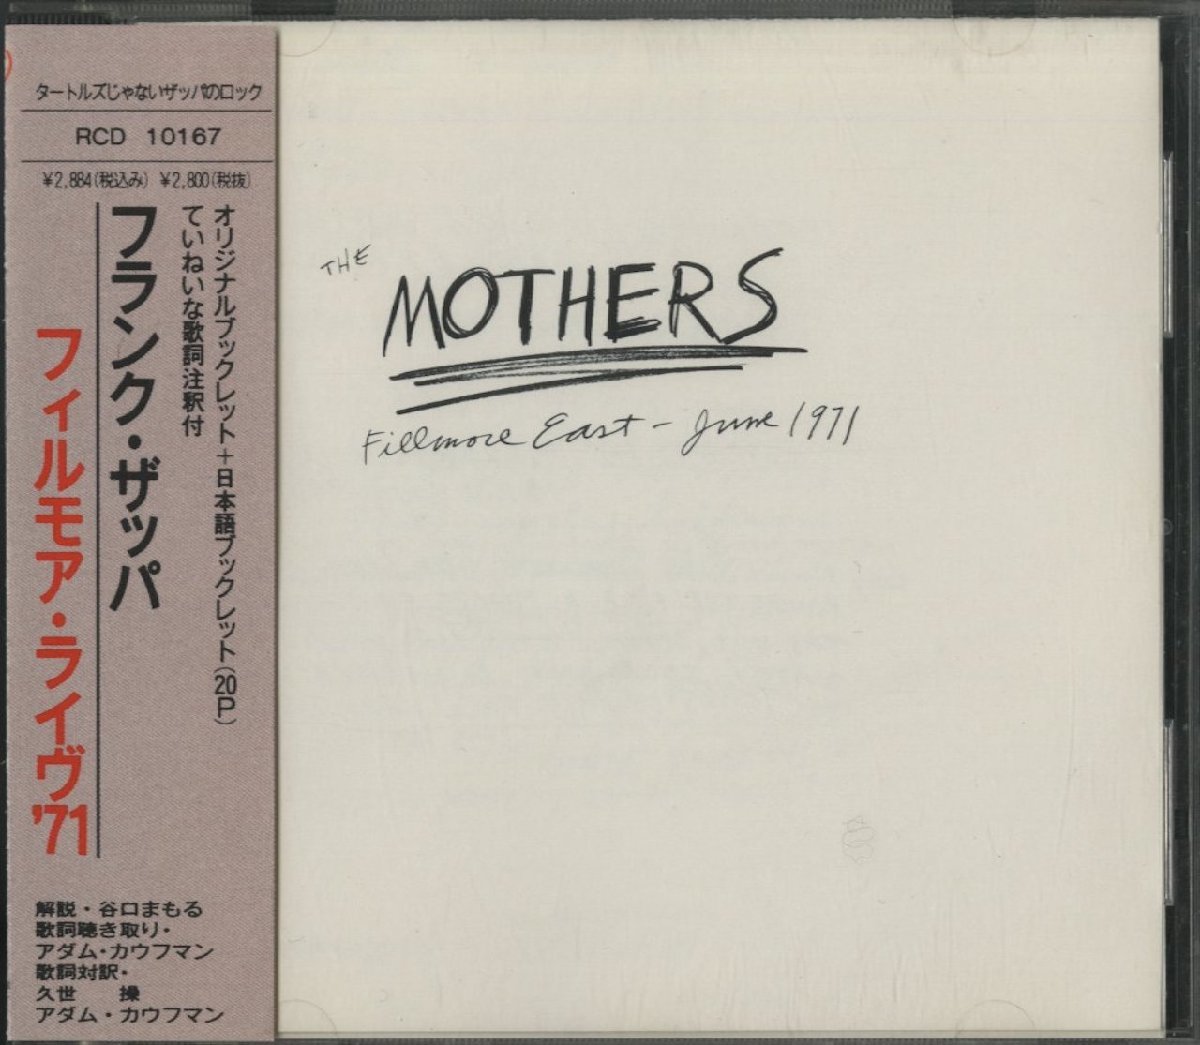 CD/FRANK ZAPPA、THE MOTHERS / FILLMORE EAST, JUNE 1971 / フランク・ザッパ / 国内盤 帯付 RCD10167 31206_画像1